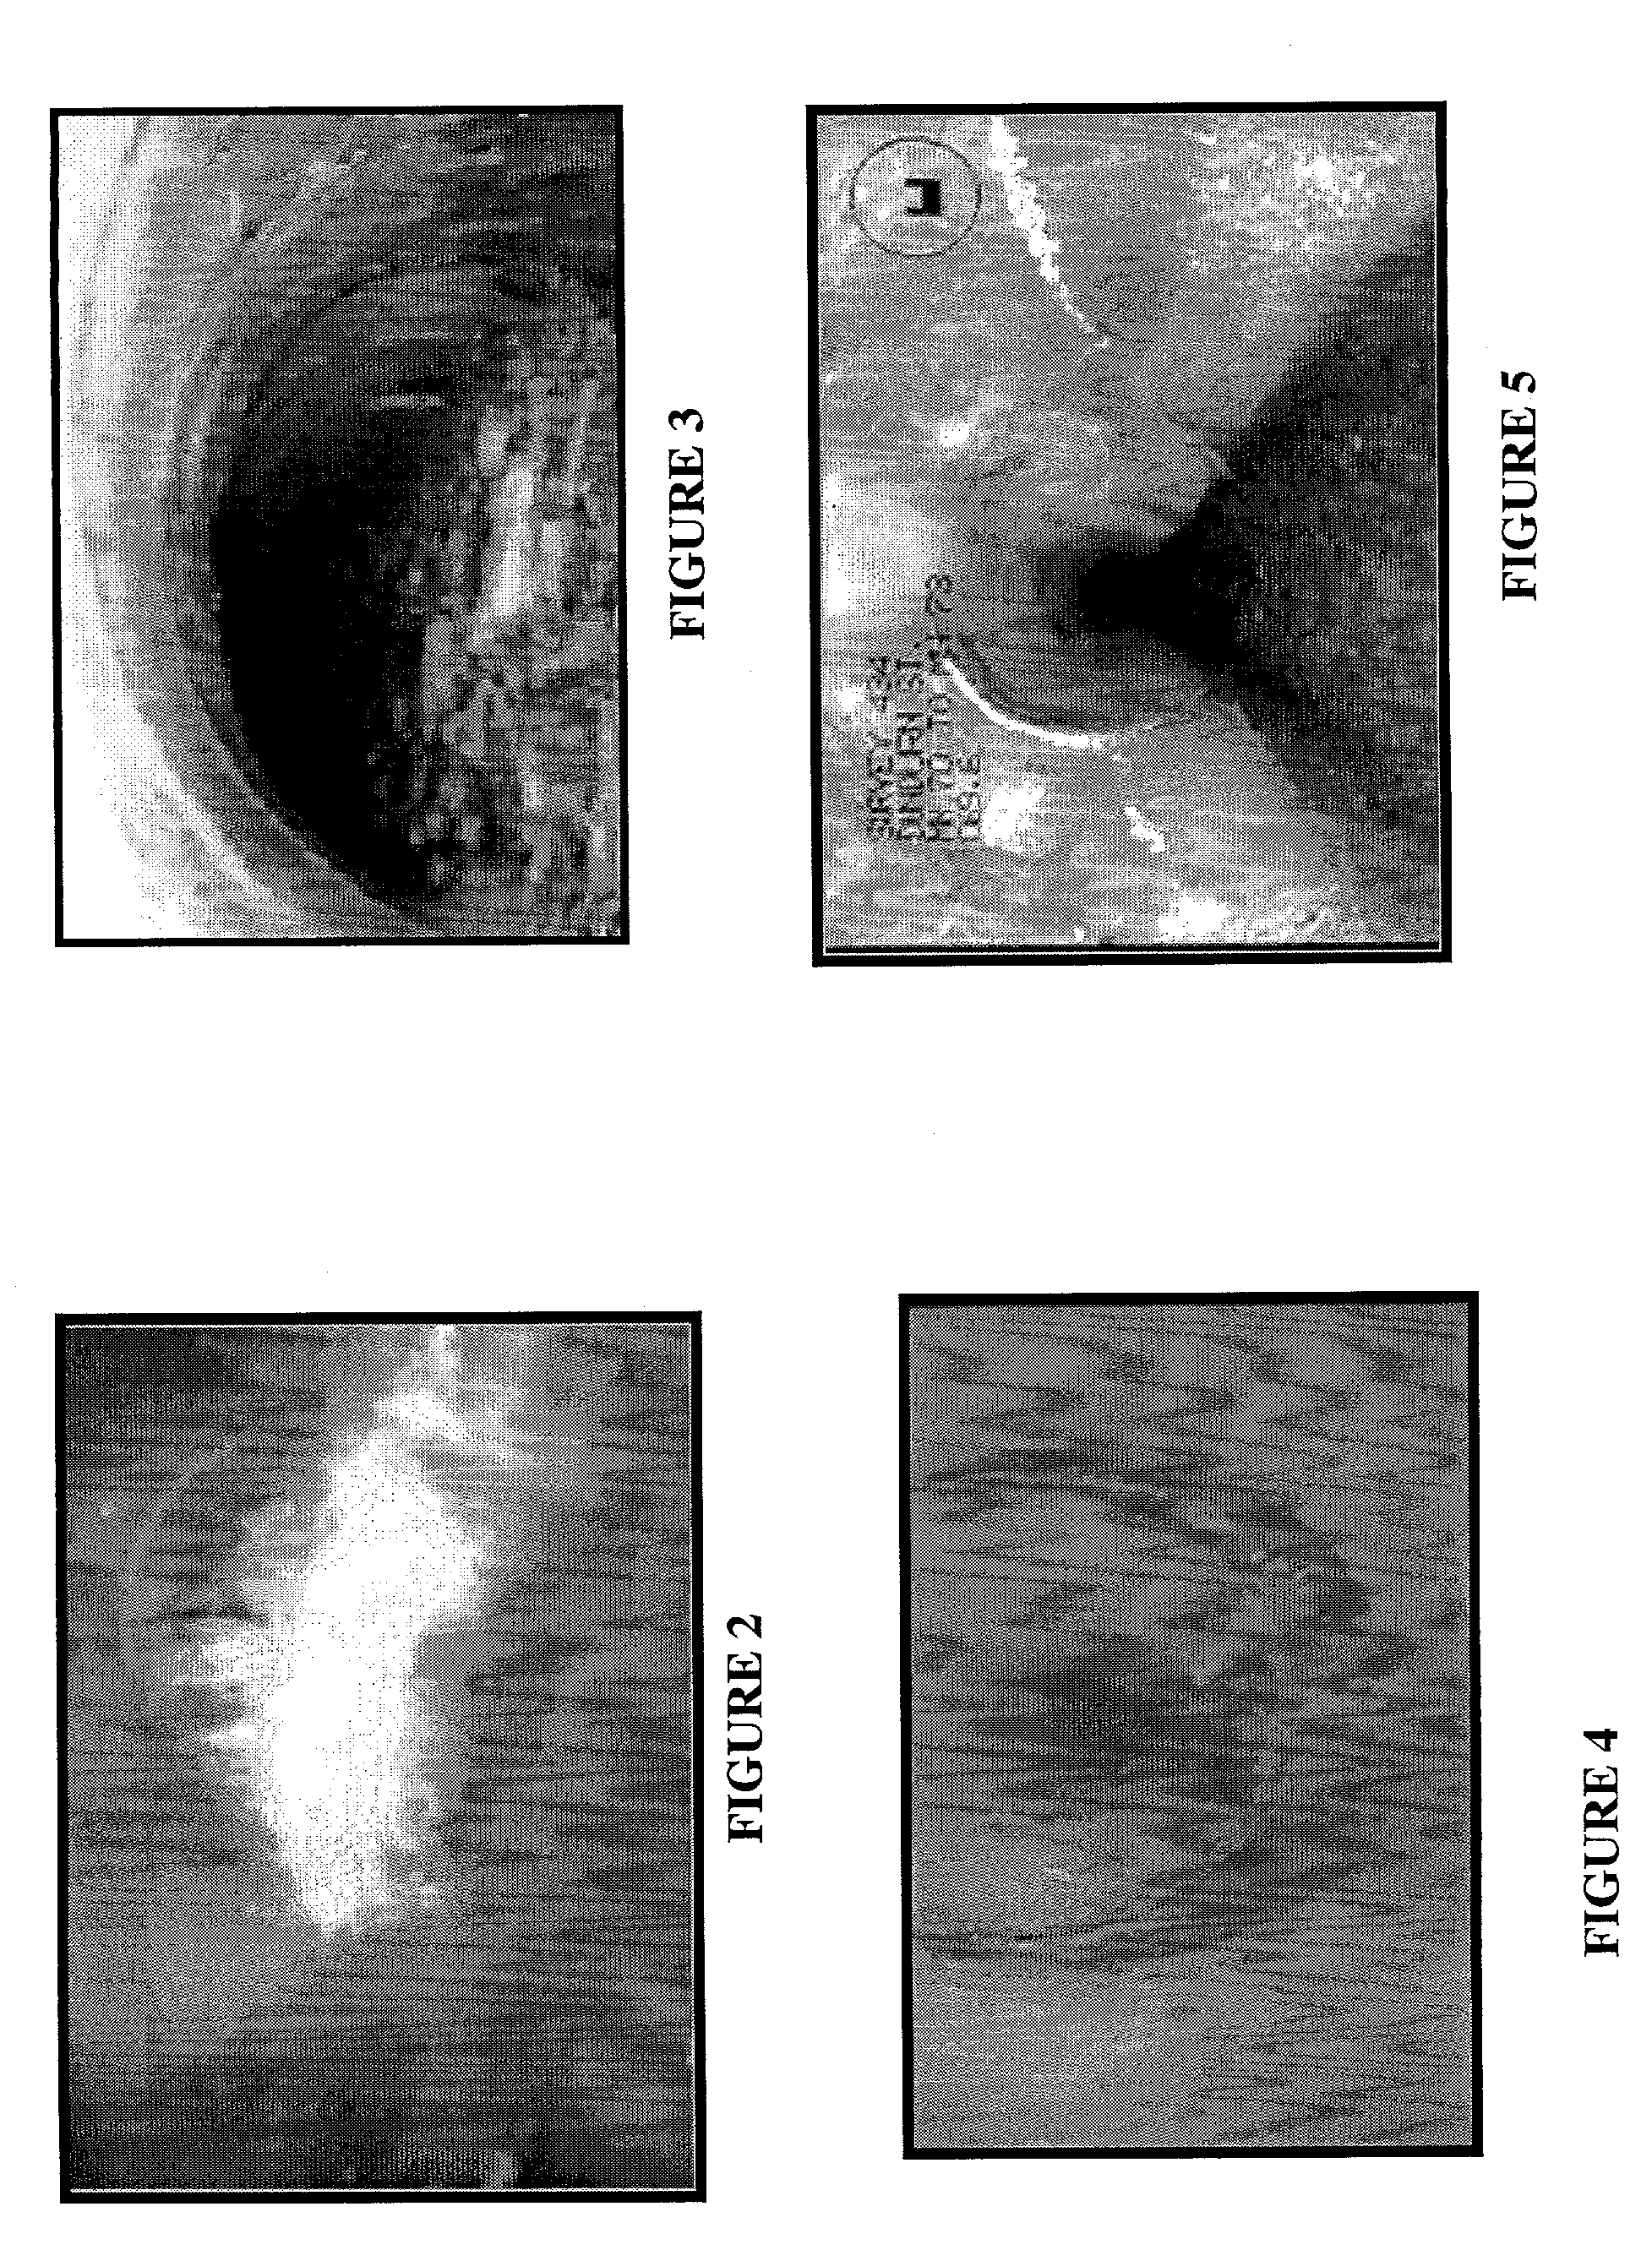 Method and apparatus for the automated detection and classification of defects in sewer pipes